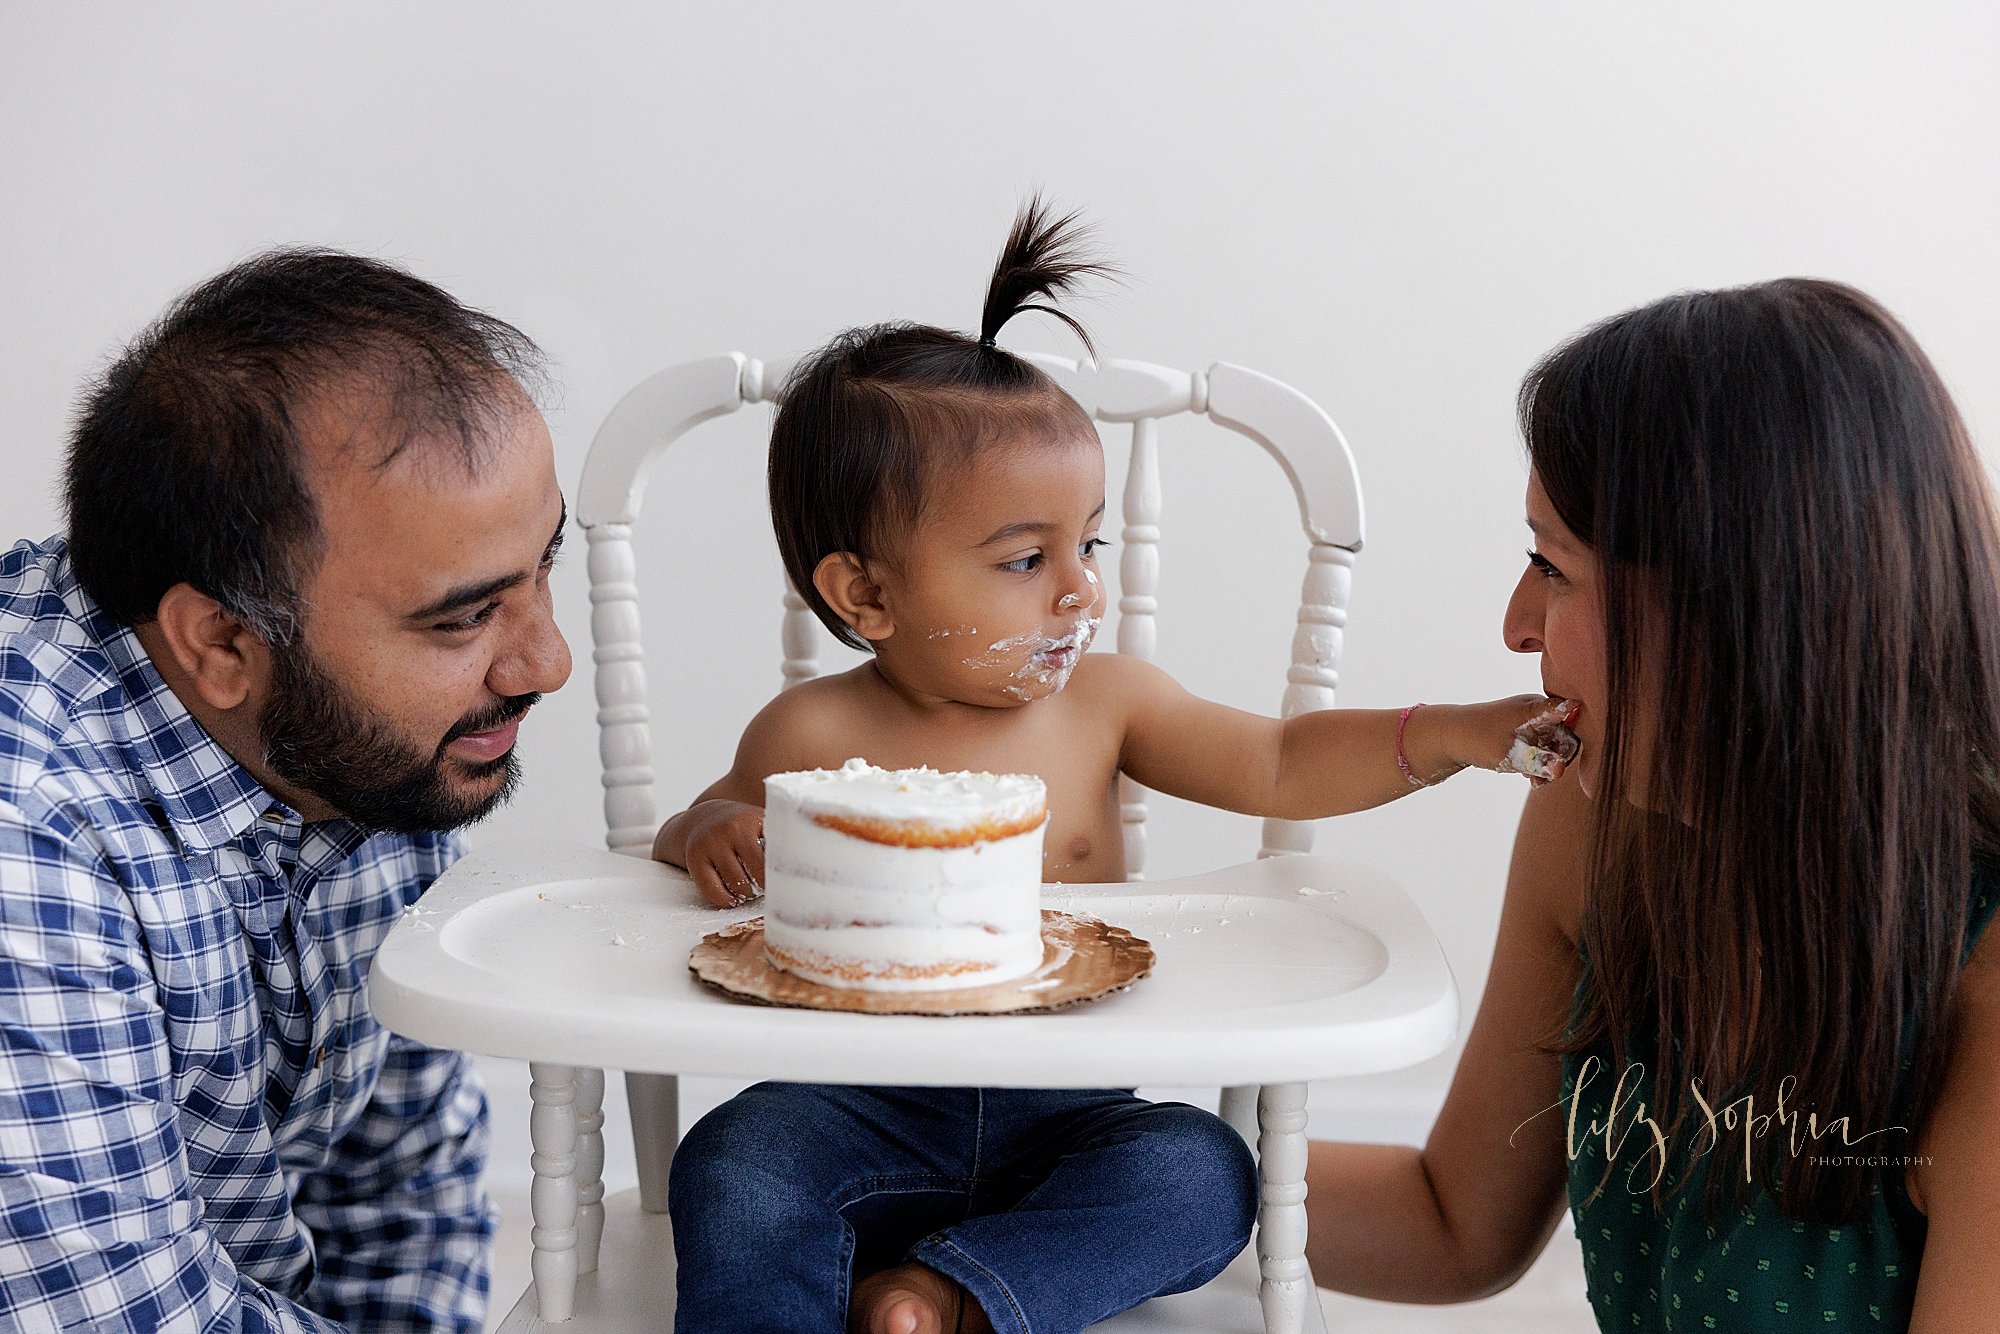  Surrounded by his parents as they squat next to him a one year old little boy sits in an antique high chair and feeds his mom icing from his smash cake as he celebrates his first birthday having a photo session near Smyrna in Atlanta in a natural li